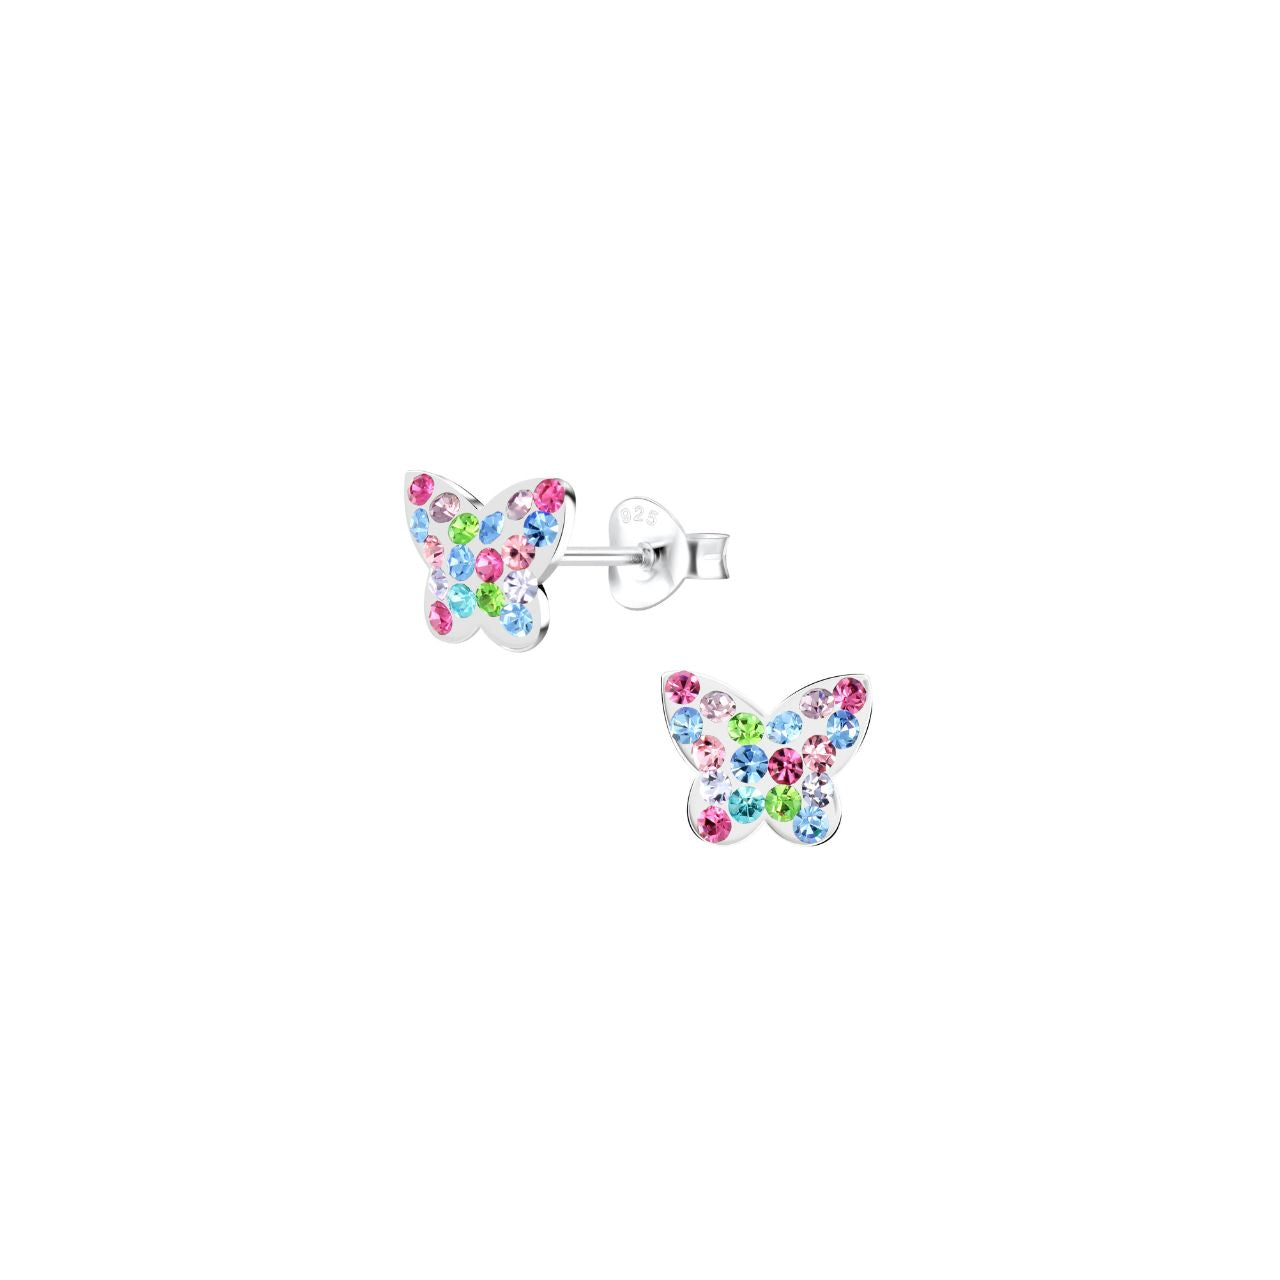 These multi coloured crystal butterfly sterling silver stud earrings have been carefully designed to give the most comfort feel.